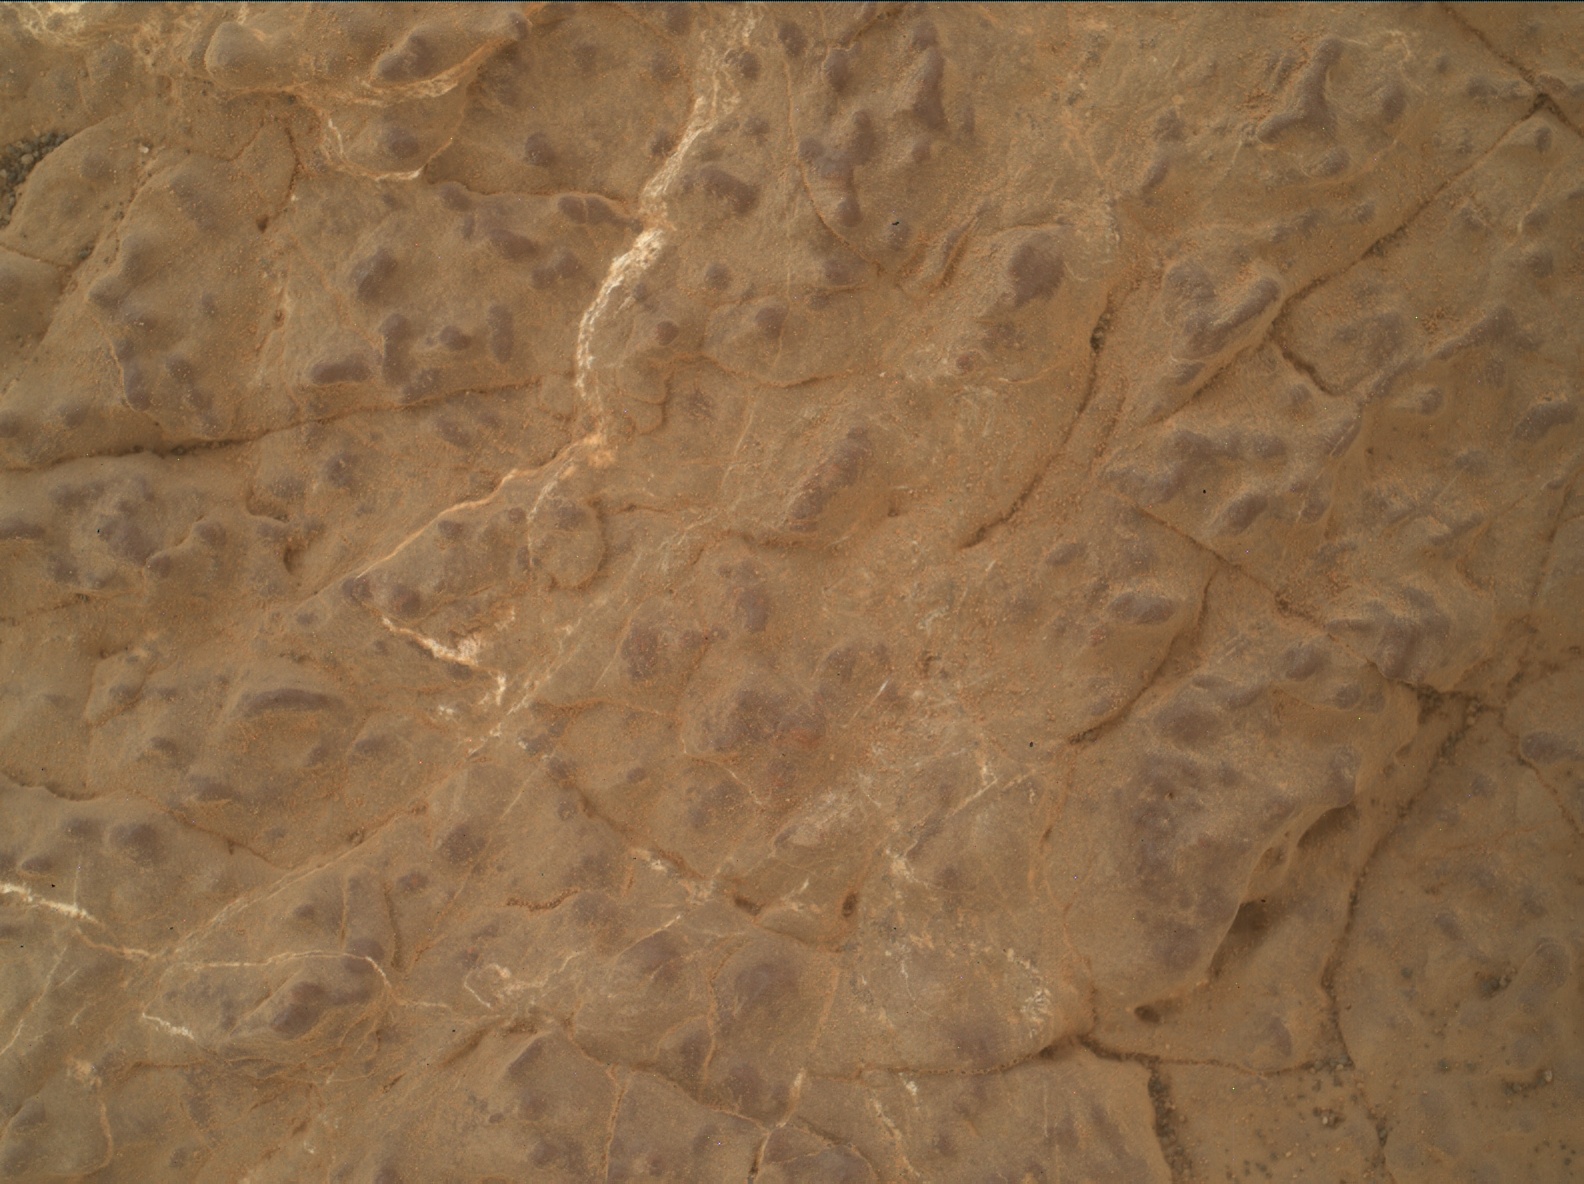 Nasa's Mars rover Curiosity acquired this image using its Mars Hand Lens Imager (MAHLI) on Sol 3031